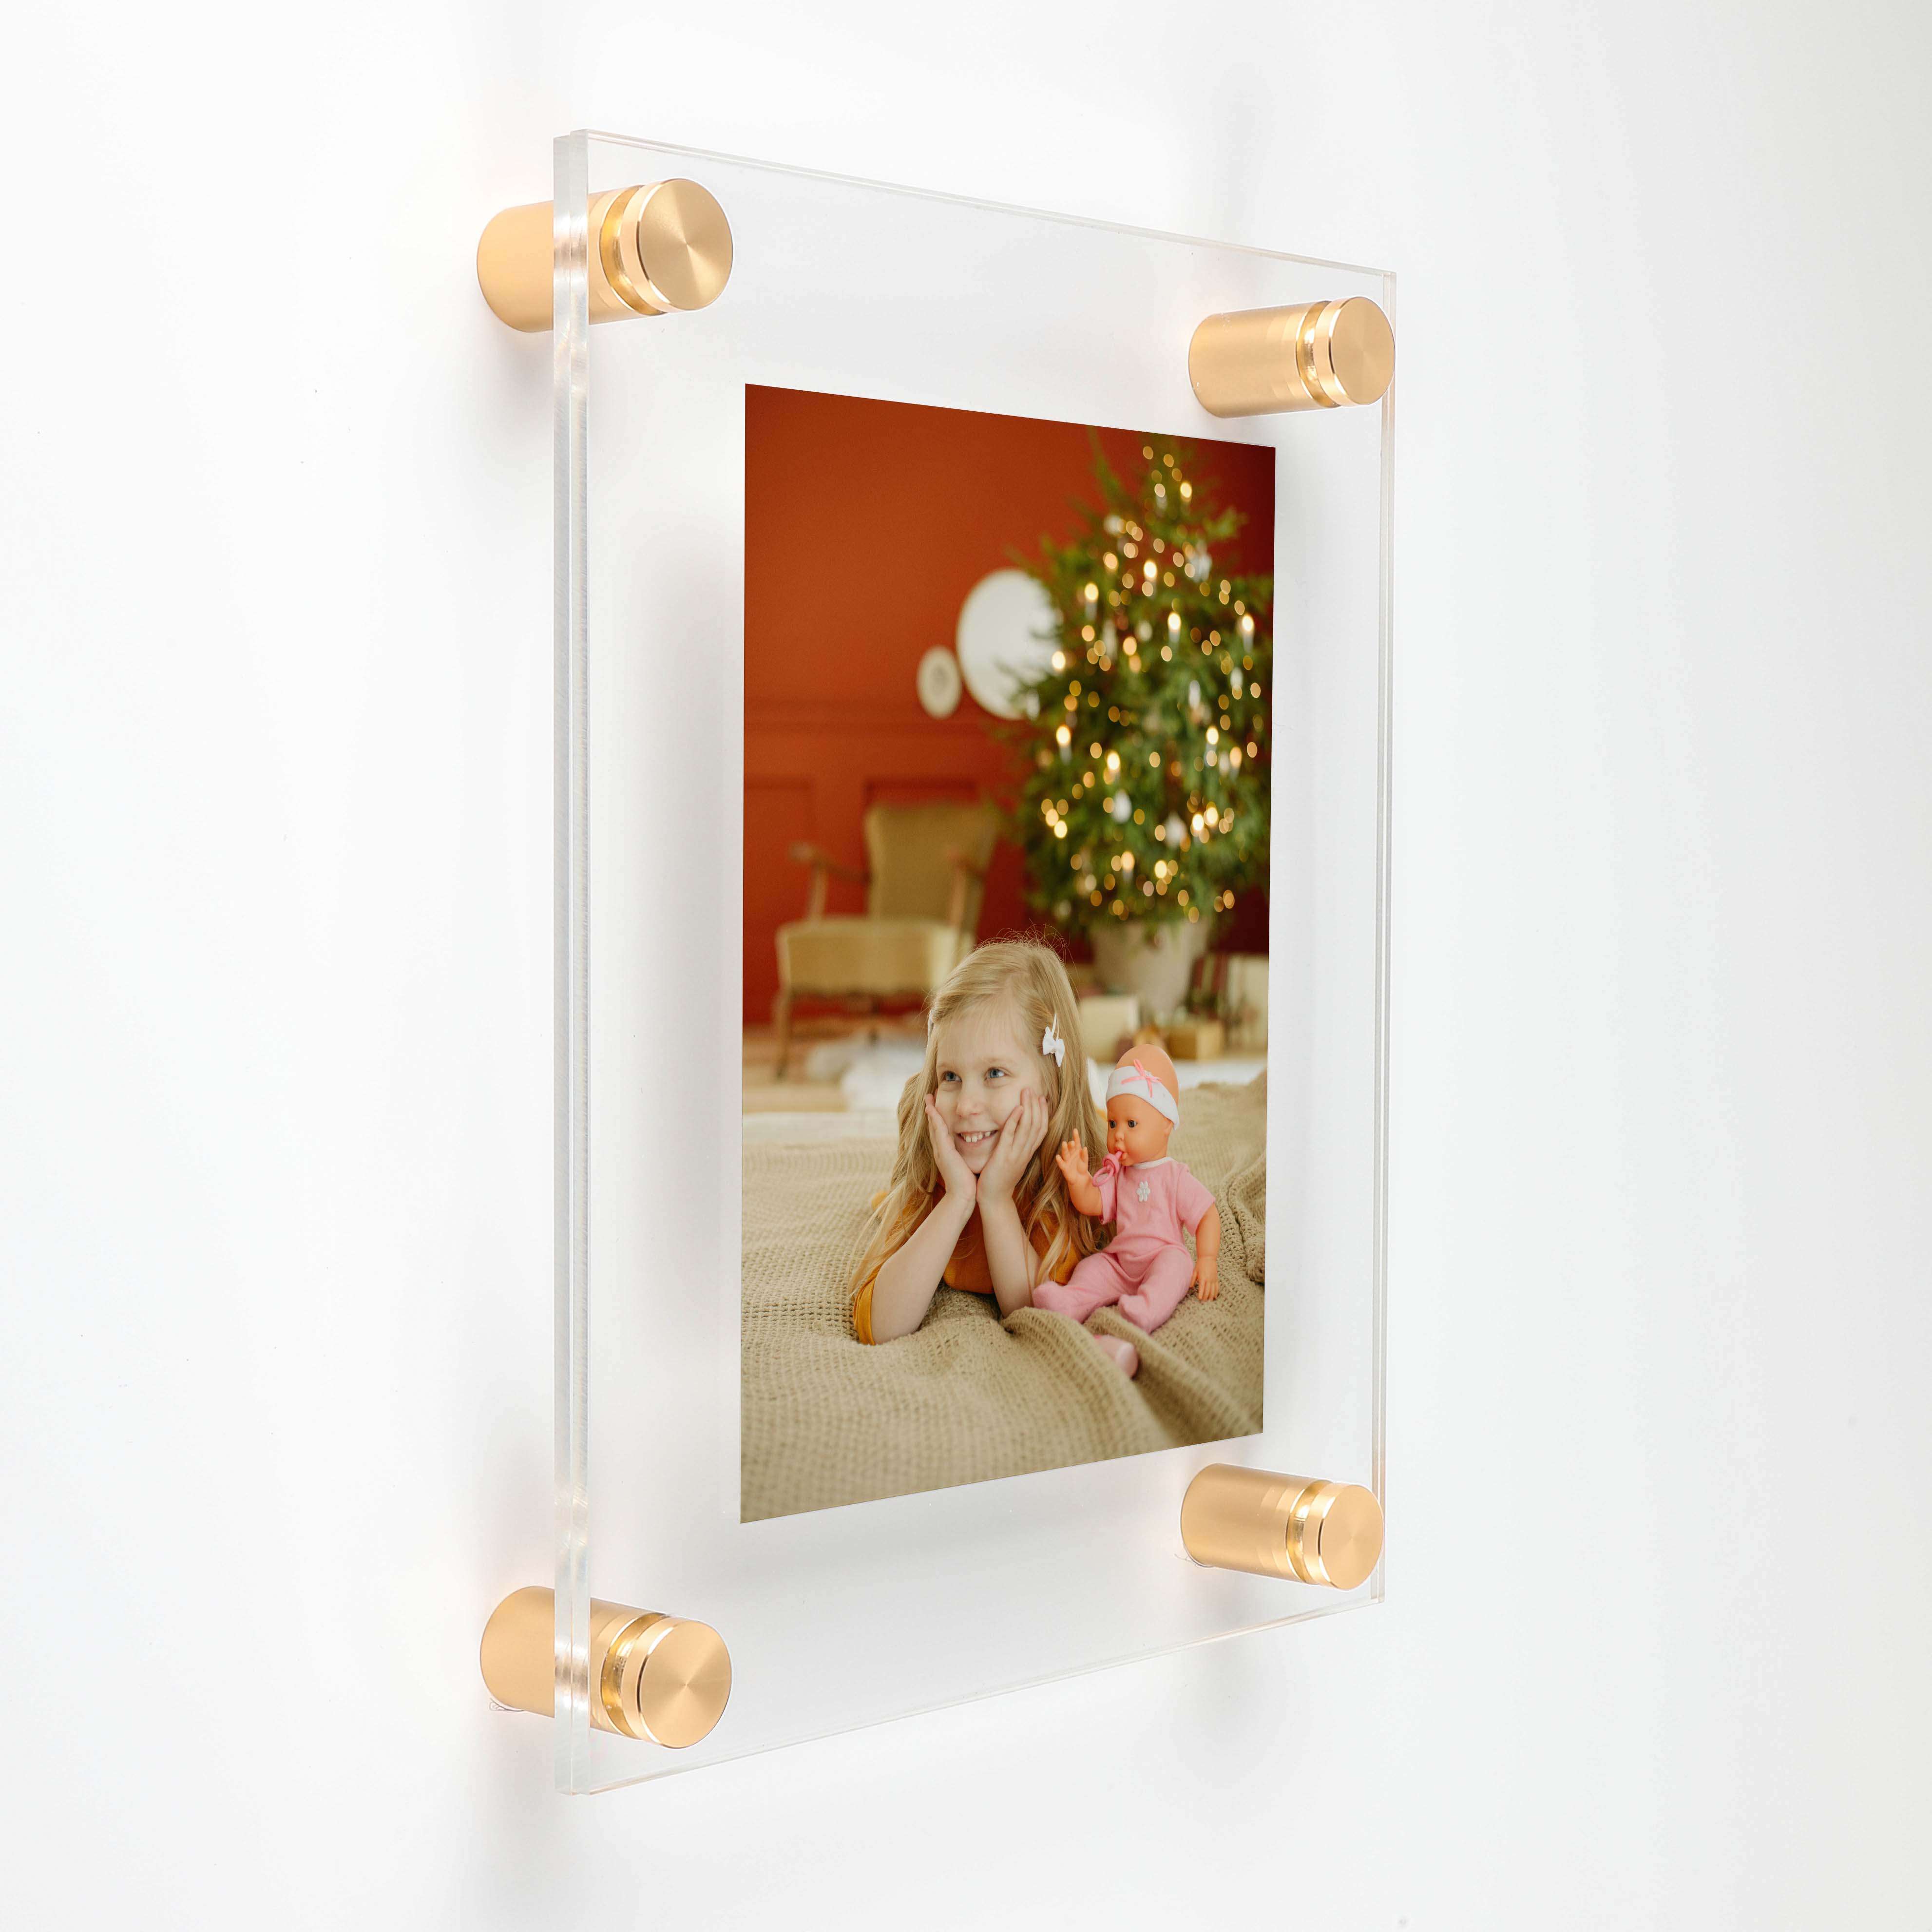 (2) 27'' x 39'' Clear Acrylics , Pre-Drilled With Polished Edges (Thick 3/16'' each), Wall Frame with (6) 5/8'' x 3/4'' Champagne Anodized Aluminum Standoffs includes Screws and Anchors